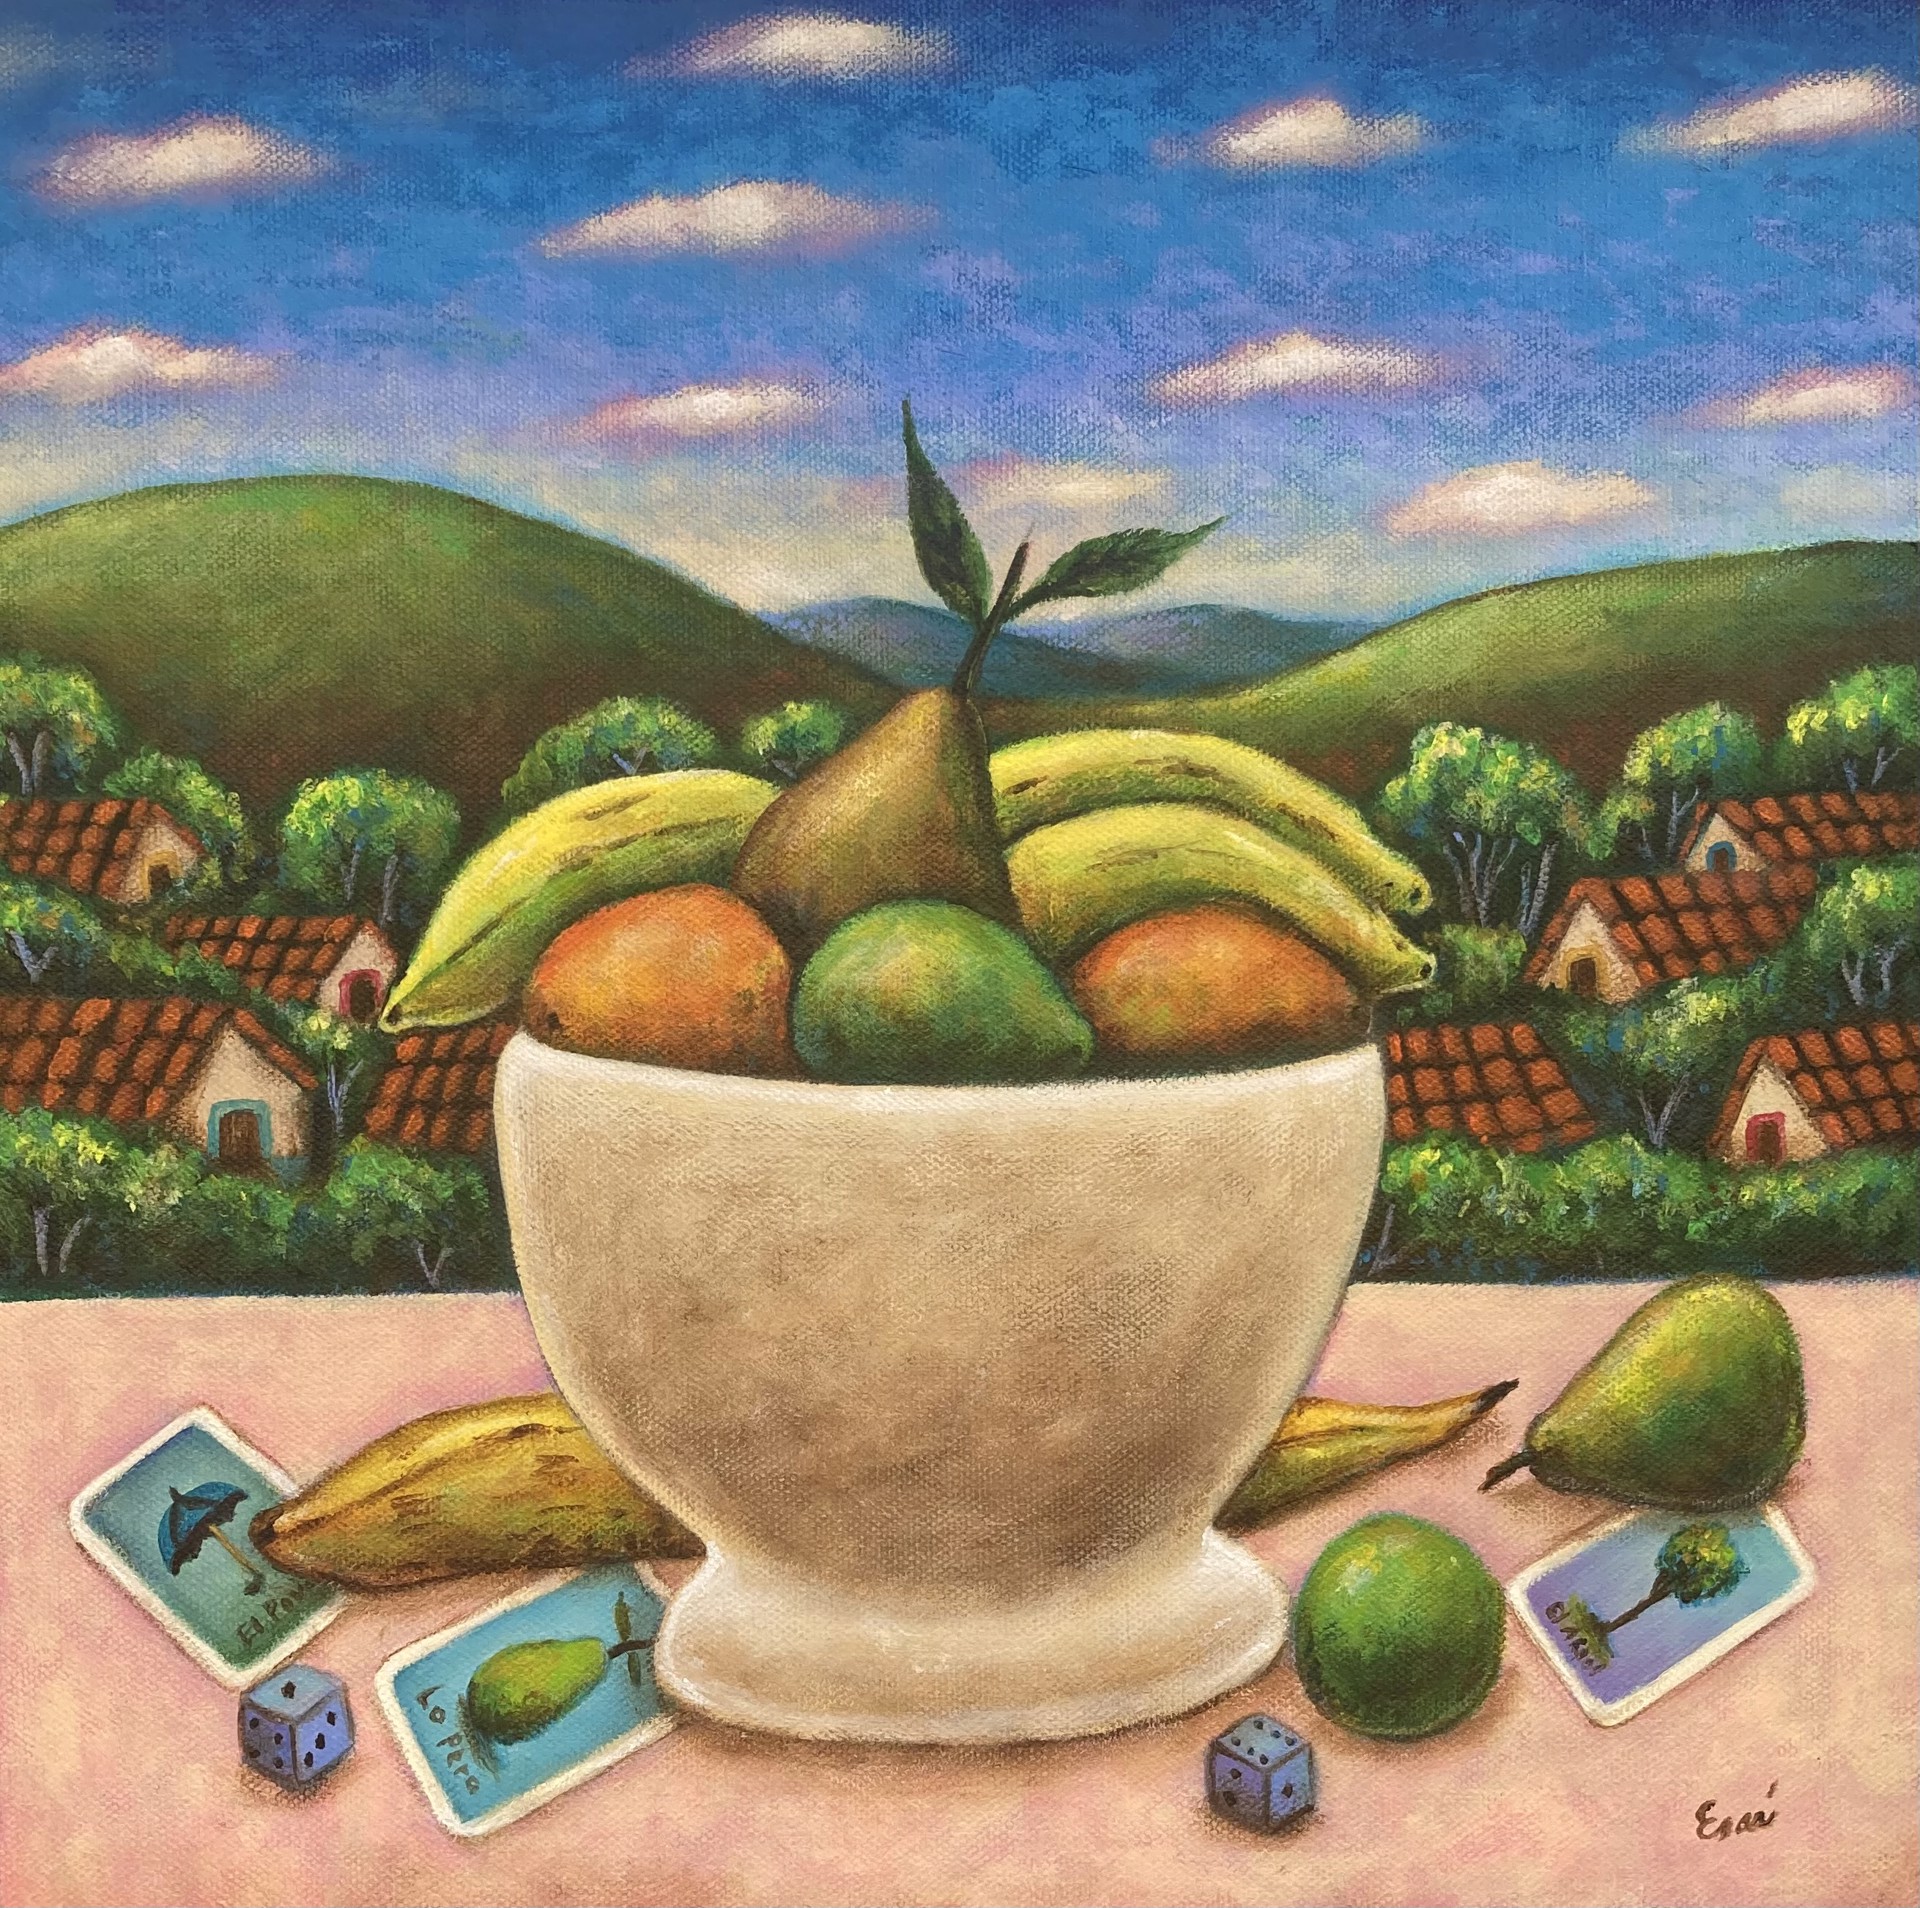 The Fruit Platter by Esau Andrade